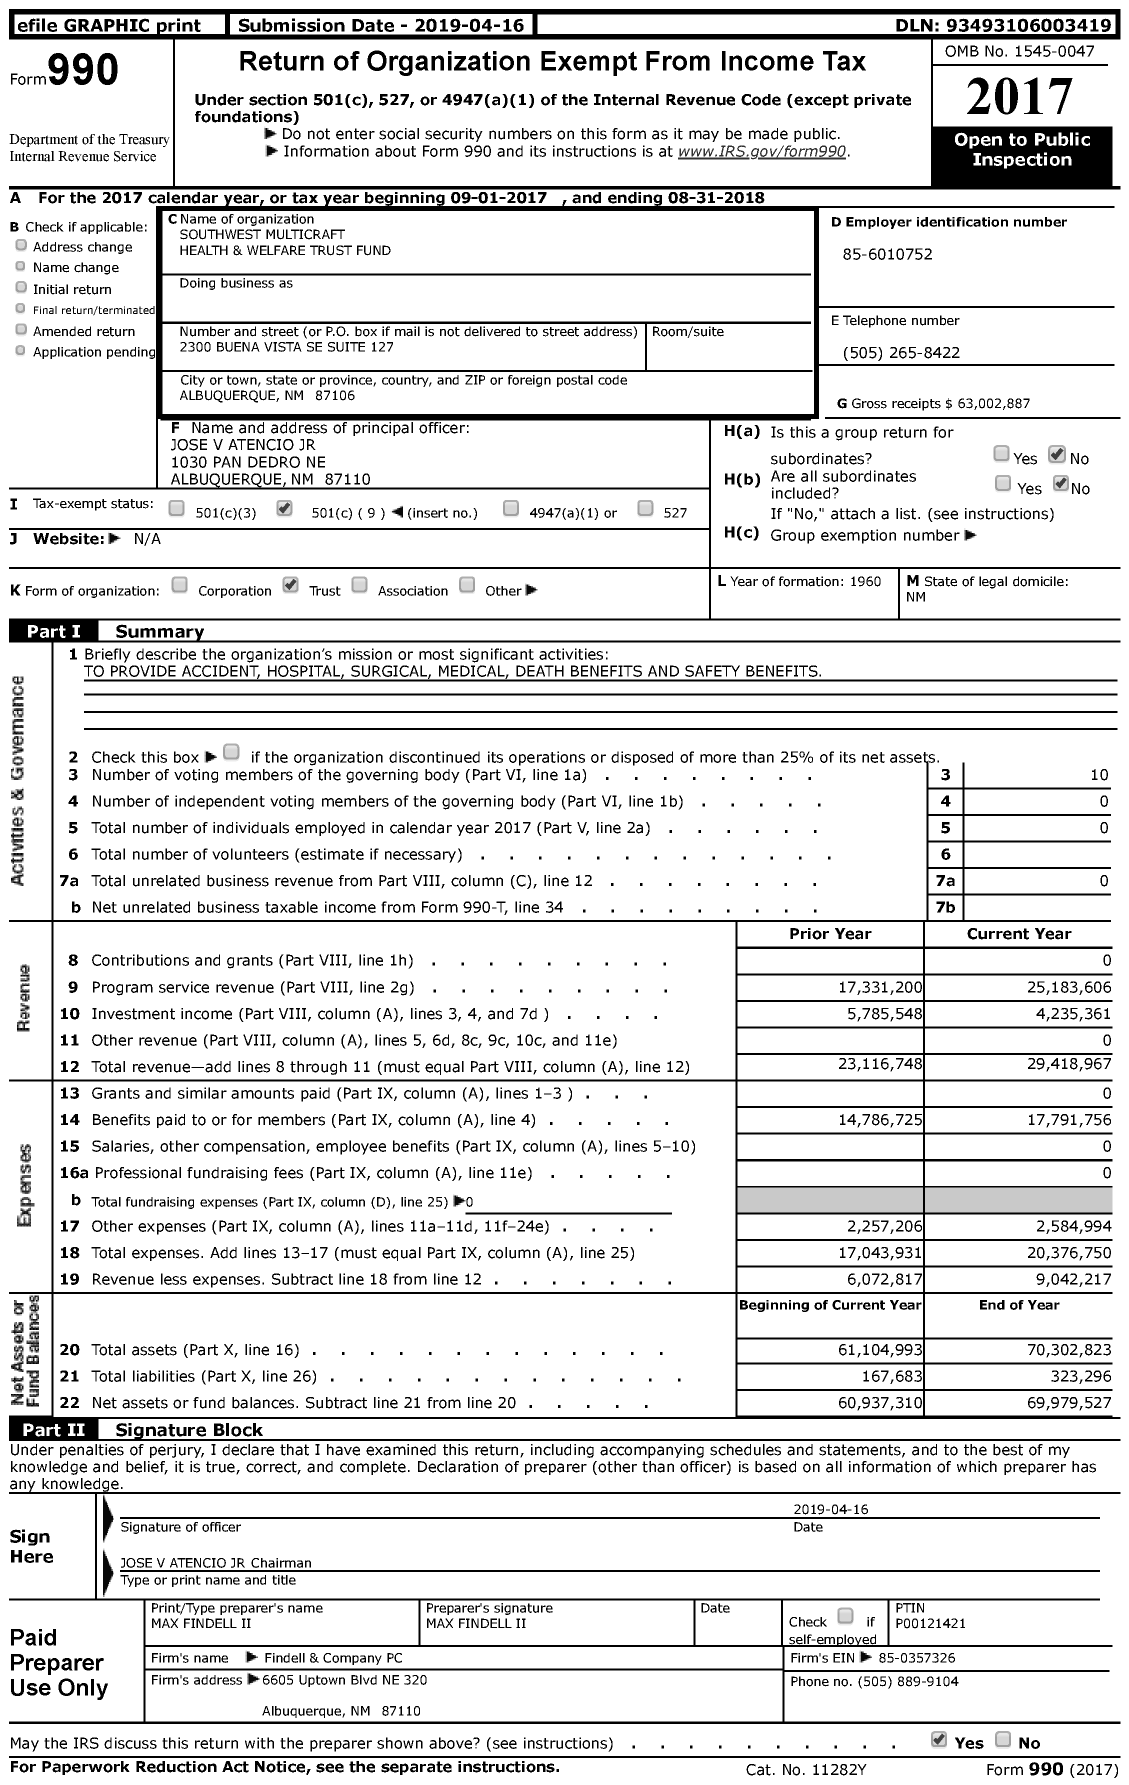 Image of first page of 2017 Form 990 for Southwest Multicraft Health and Welfare Trust Fund